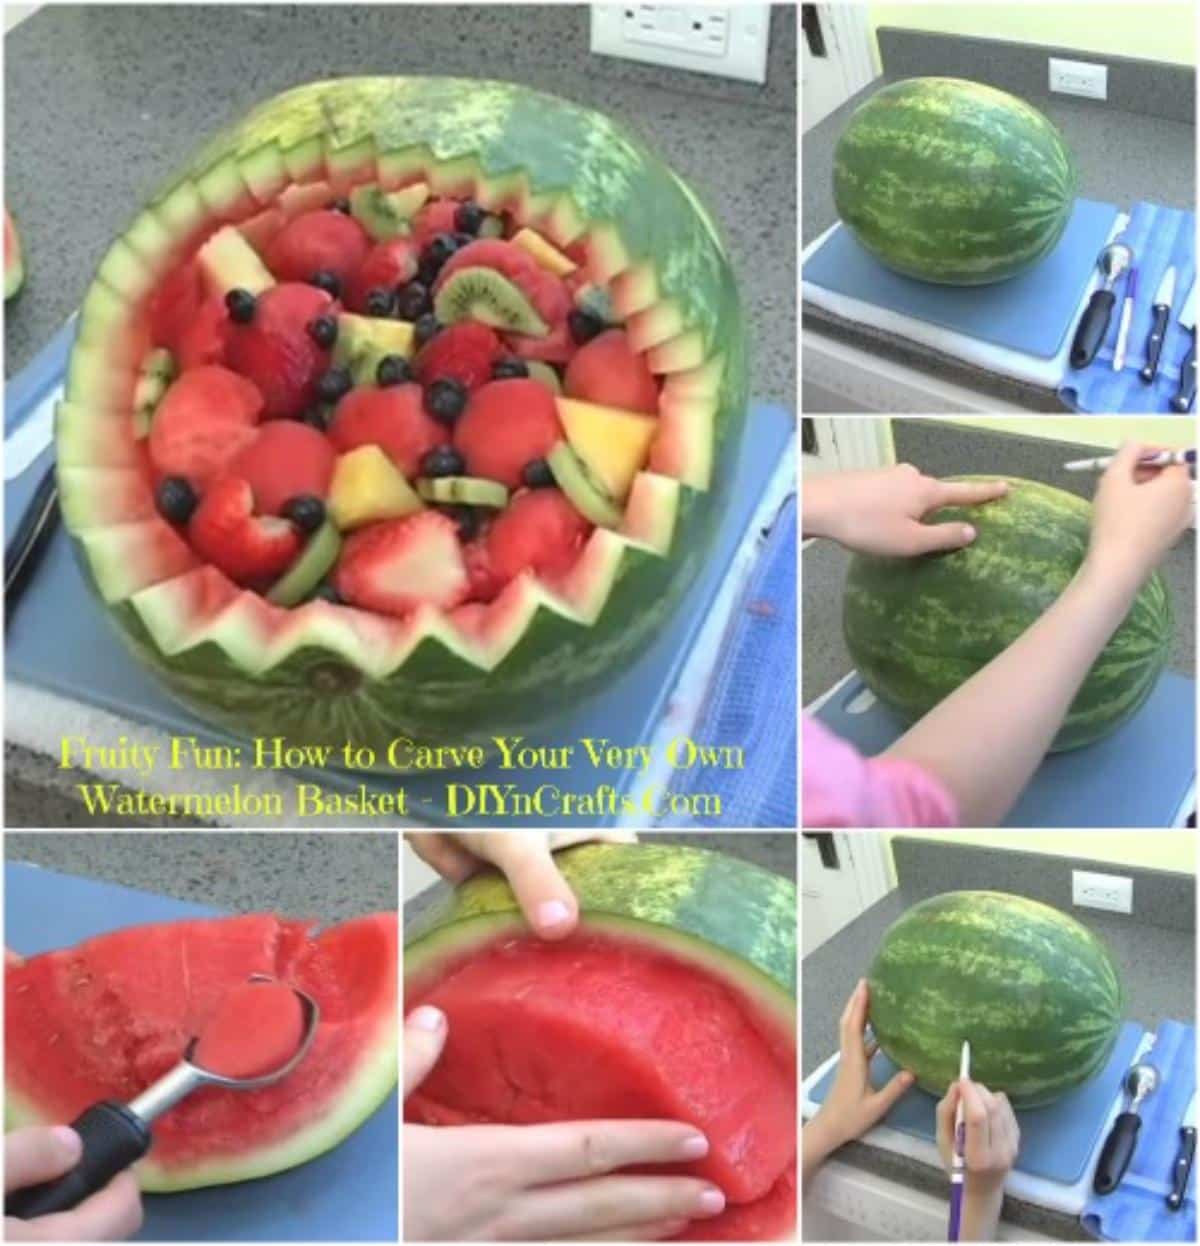 Carved Watermelon Basket collage.